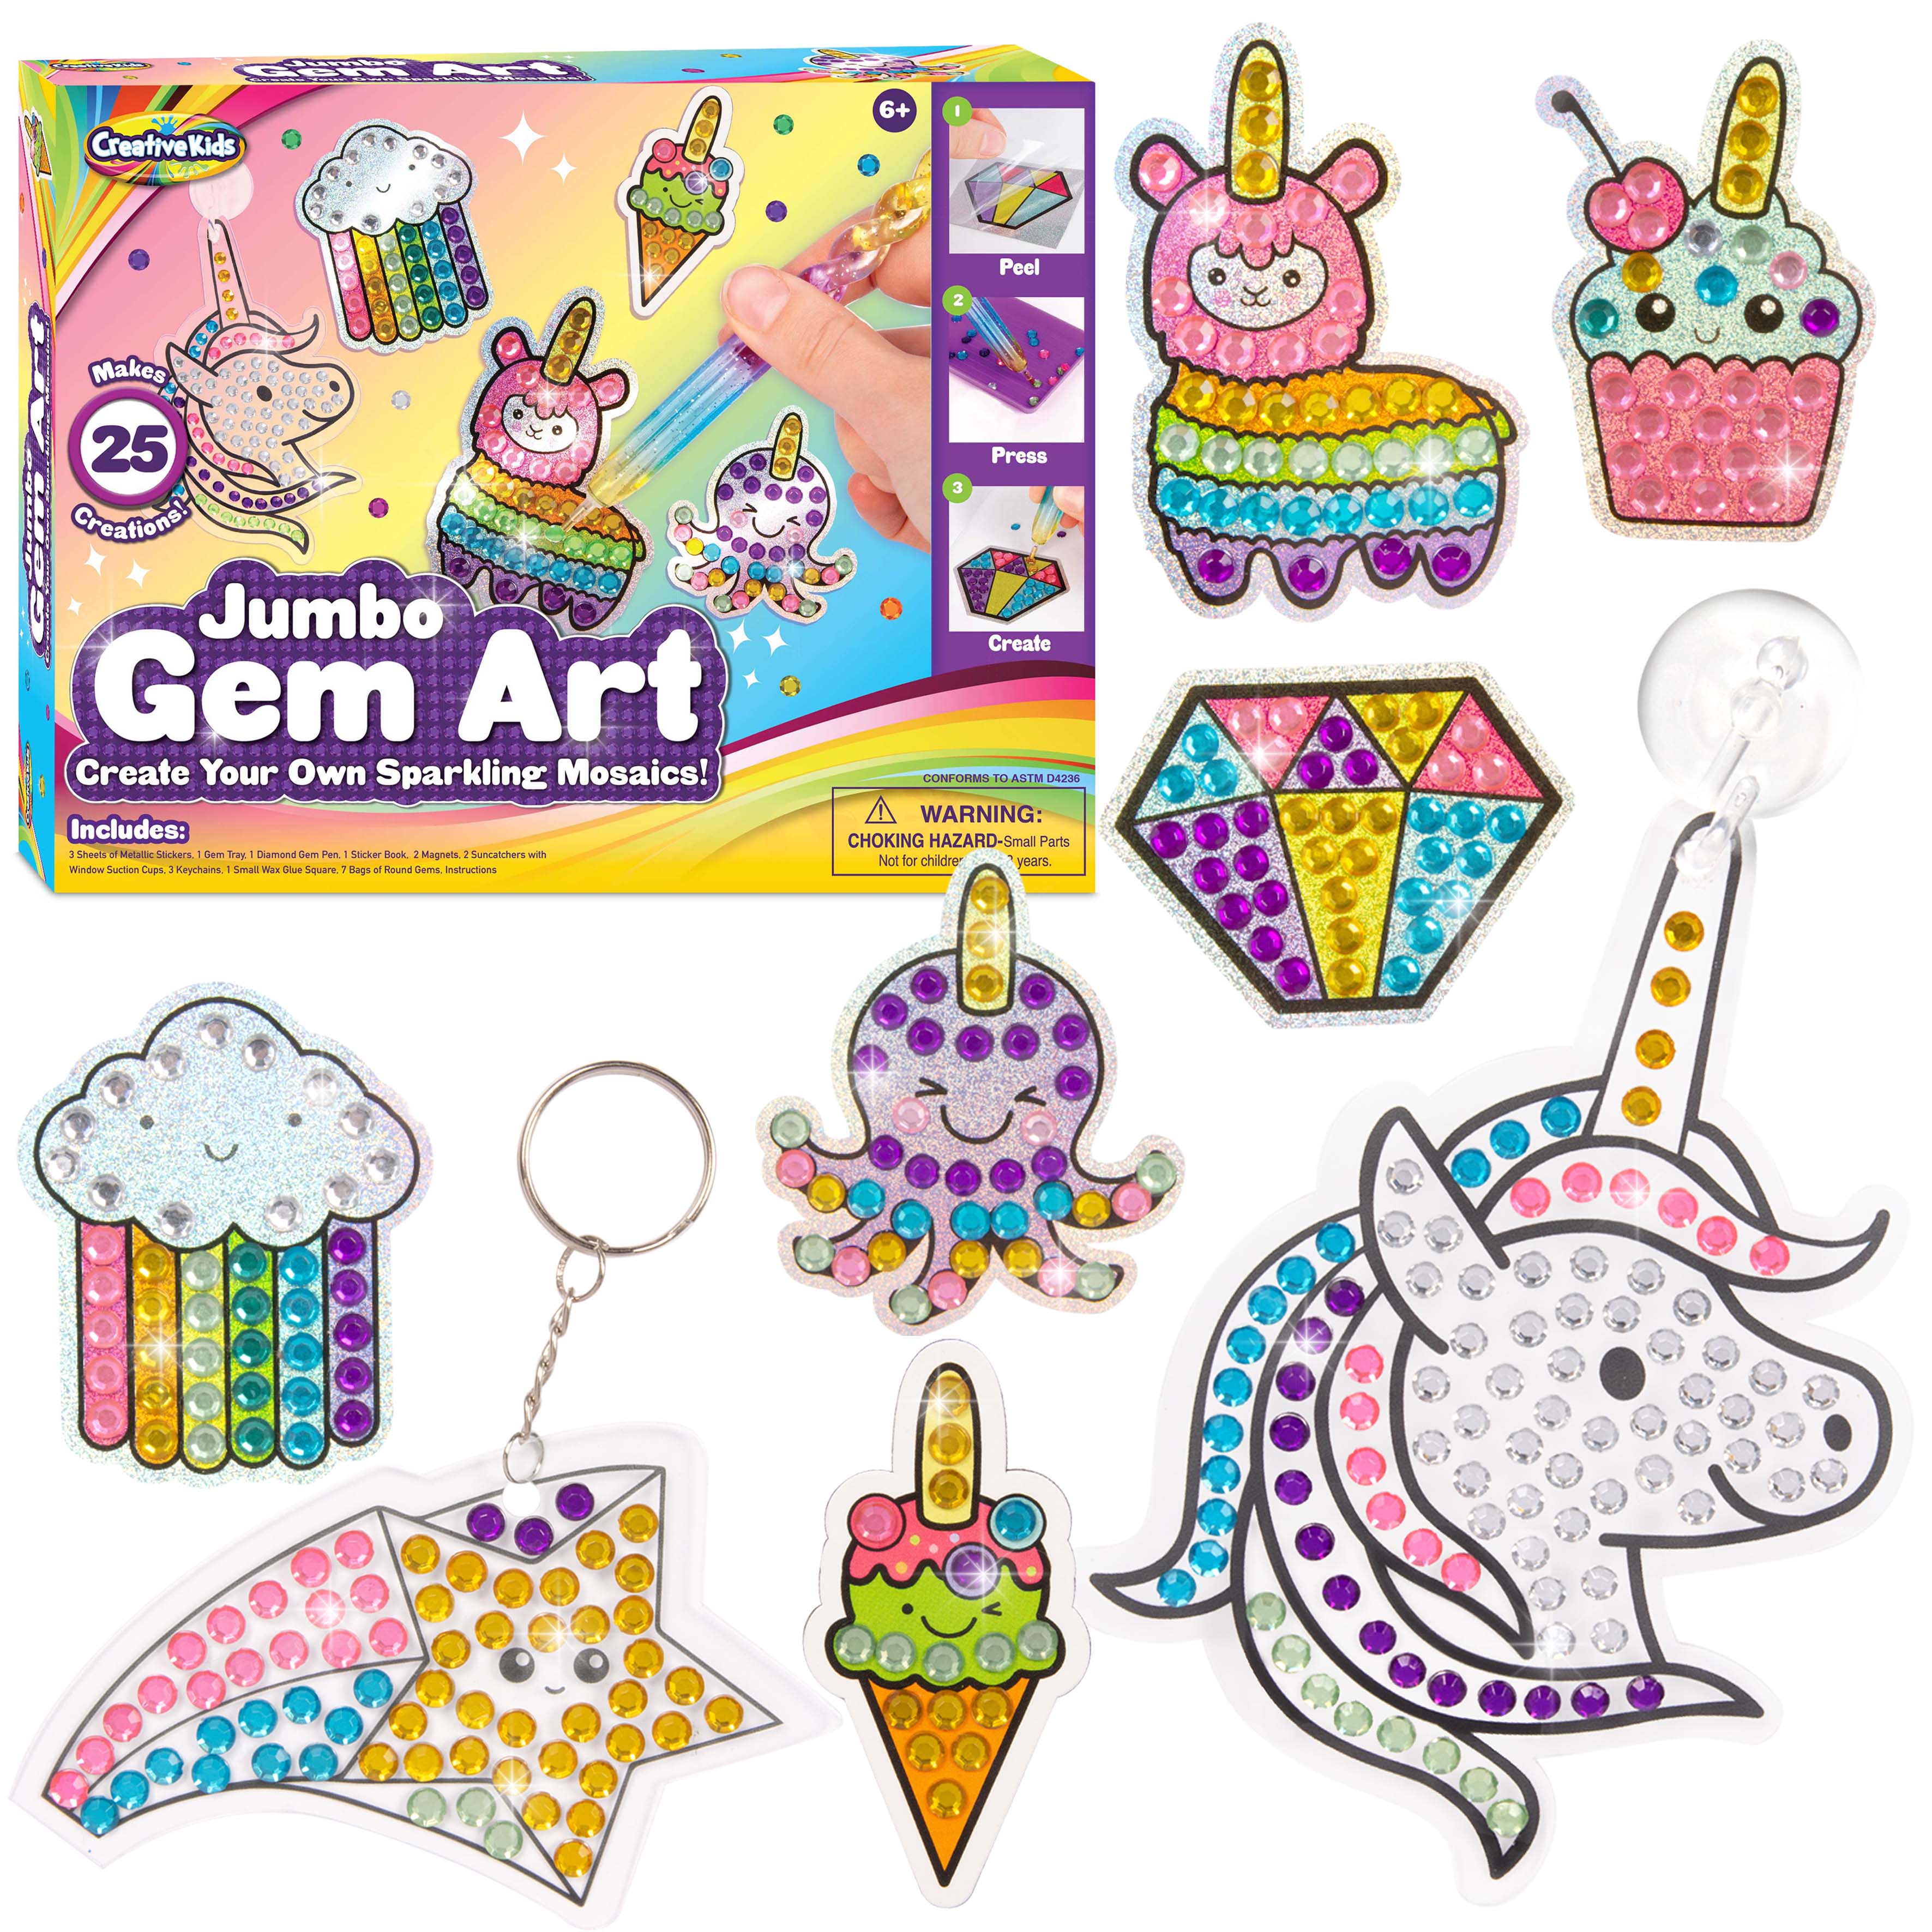 Labeol Arts and Crafts for Kids Ages 8-12 - Creat Your Own GEM